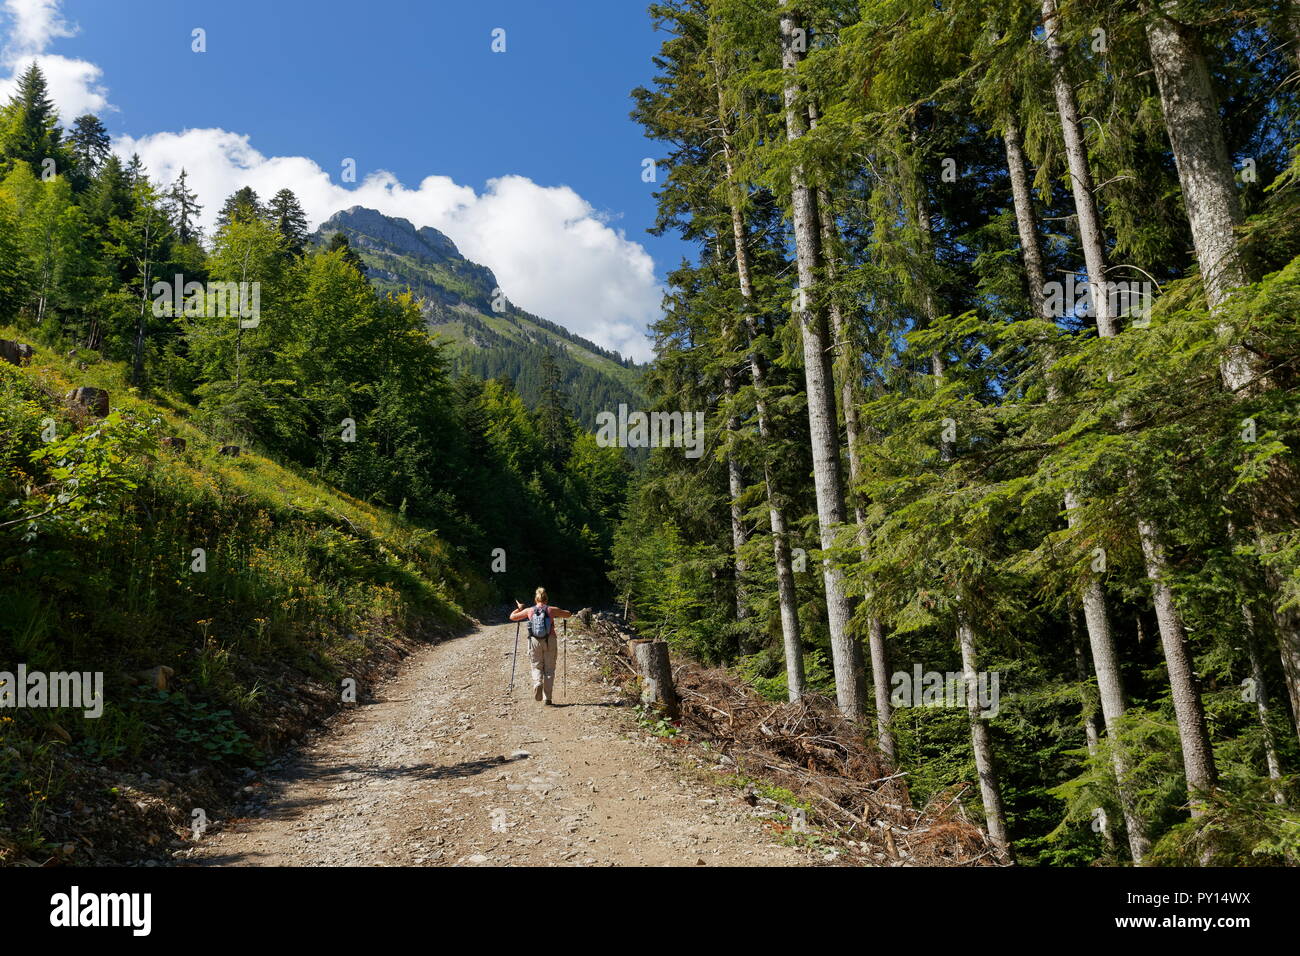 Female walker hiking through a forest on one of the trails around the La Sambuy mountain area near Faverges France Stock Photo